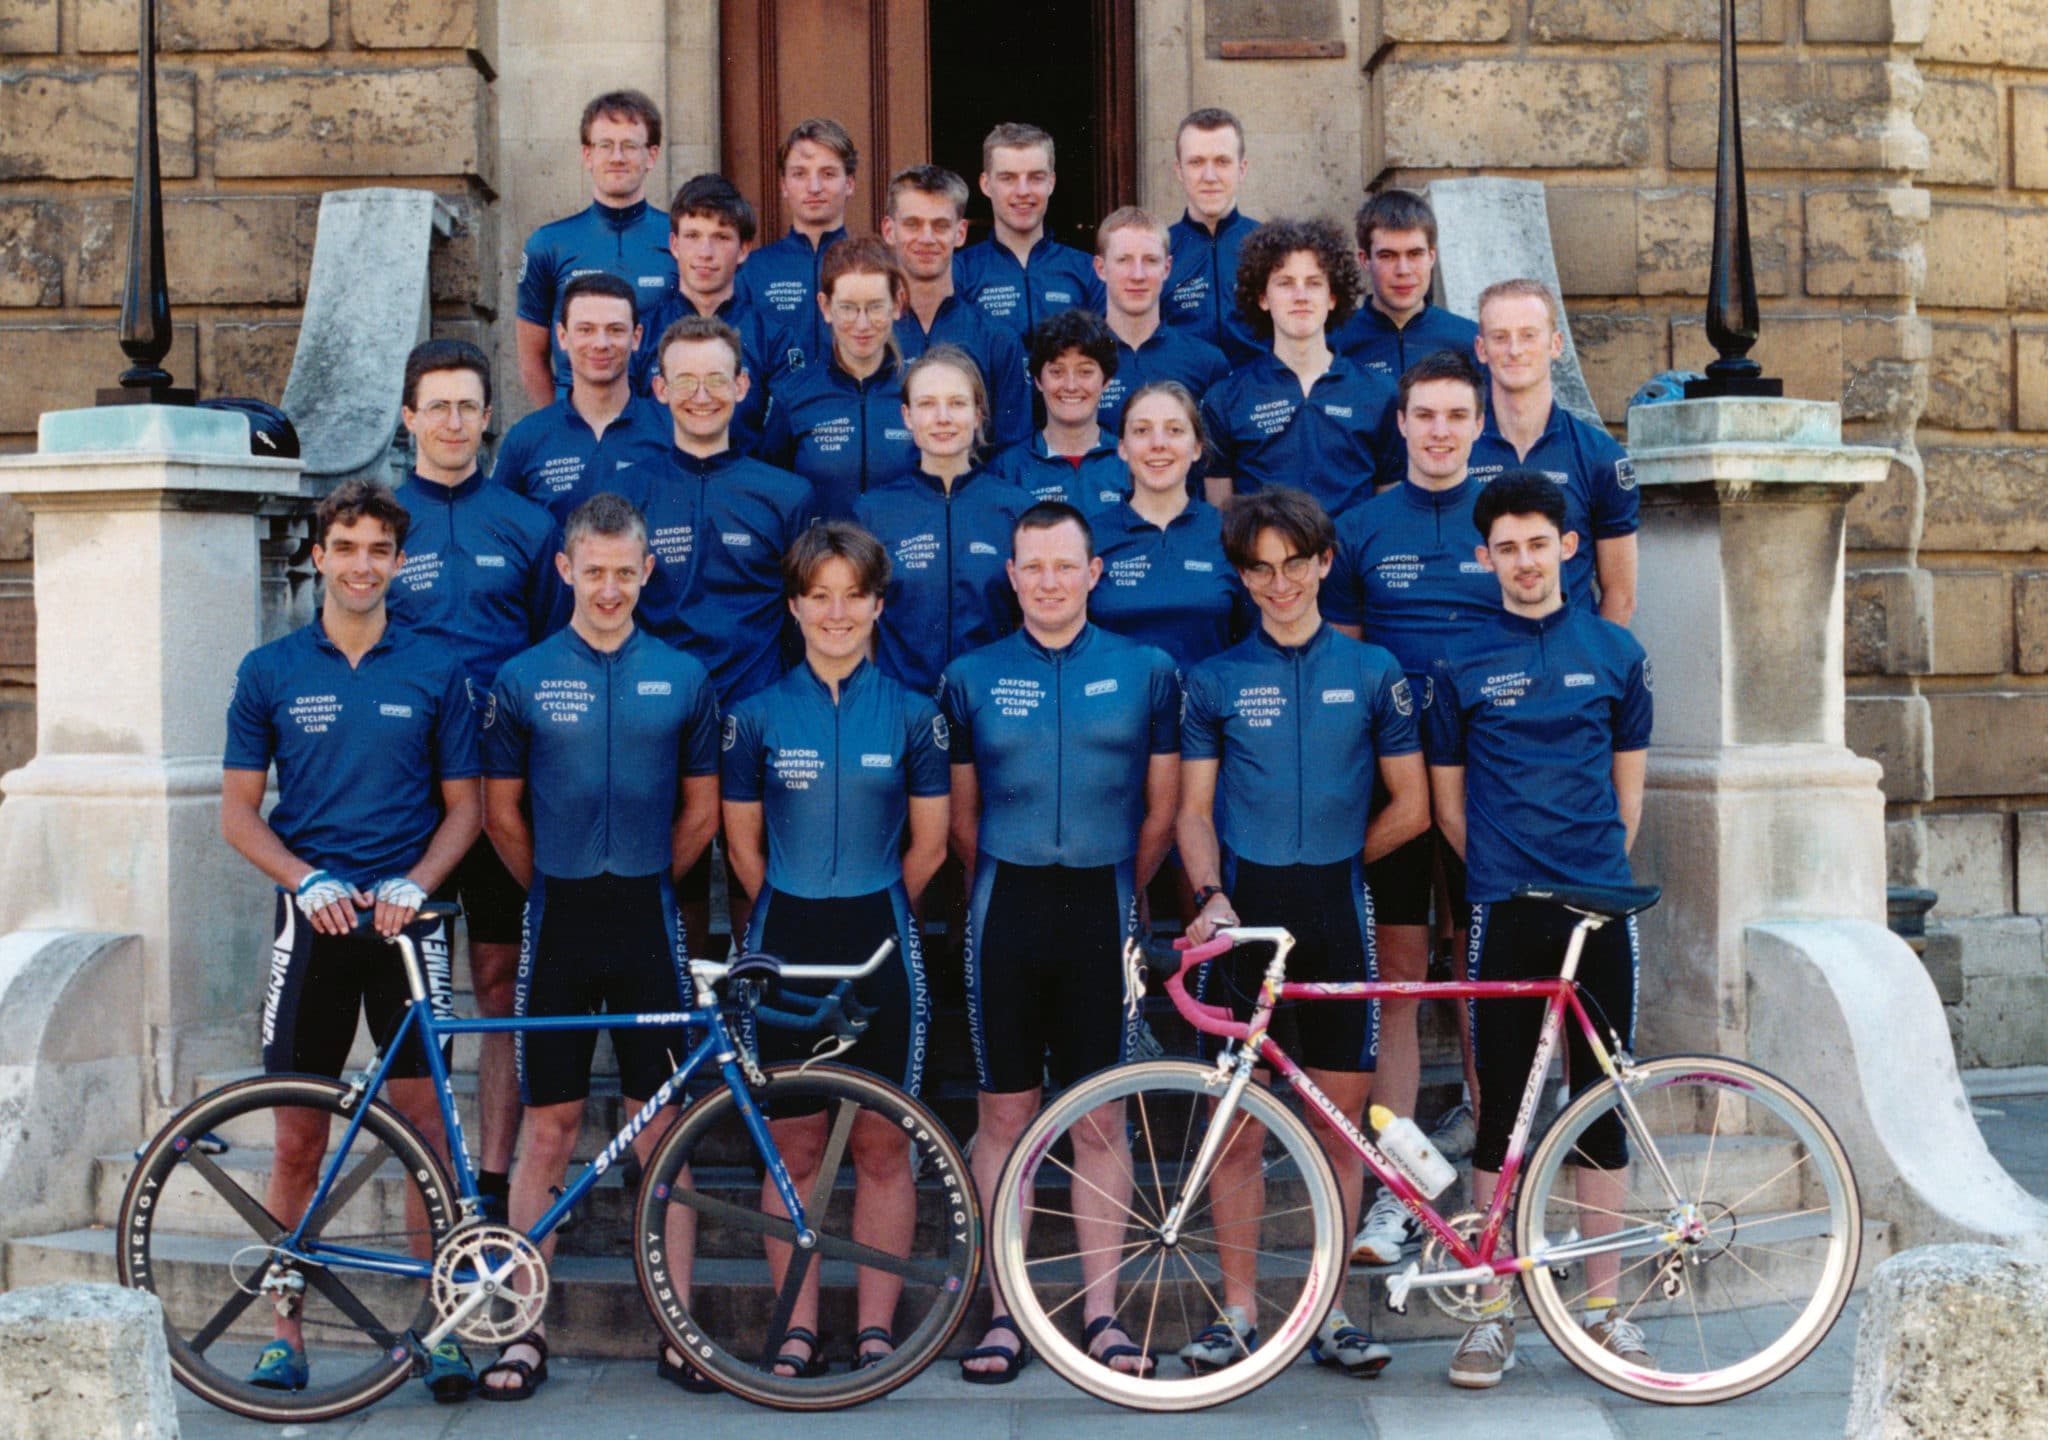 OUCC team photo from 1998. Click to enlarge